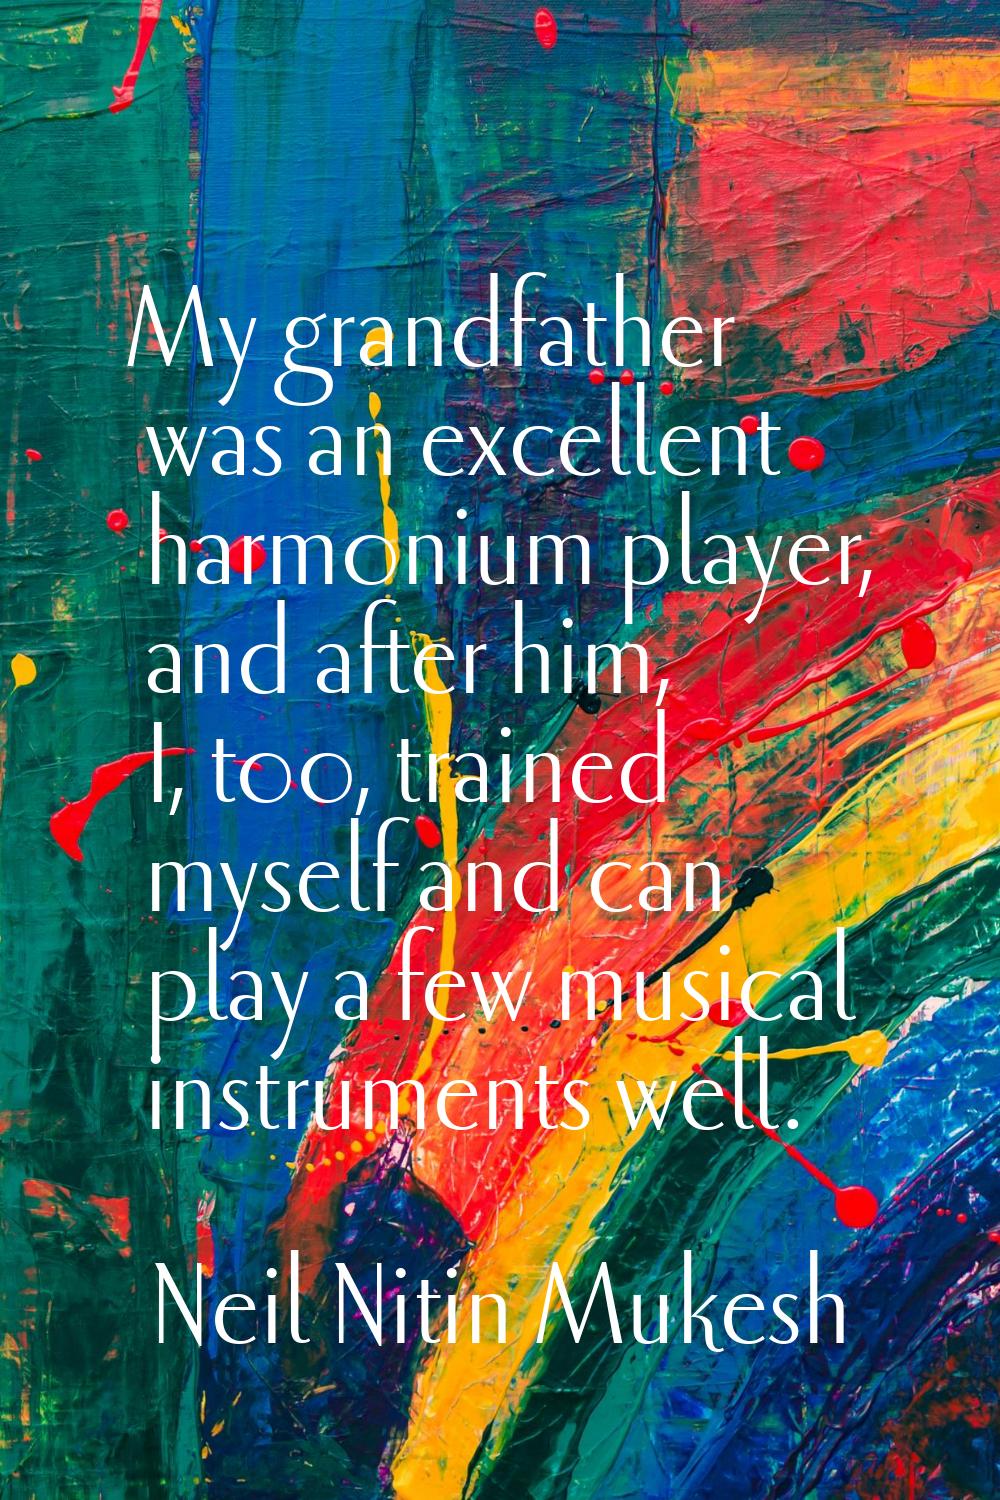 My grandfather was an excellent harmonium player, and after him, I, too, trained myself and can pla